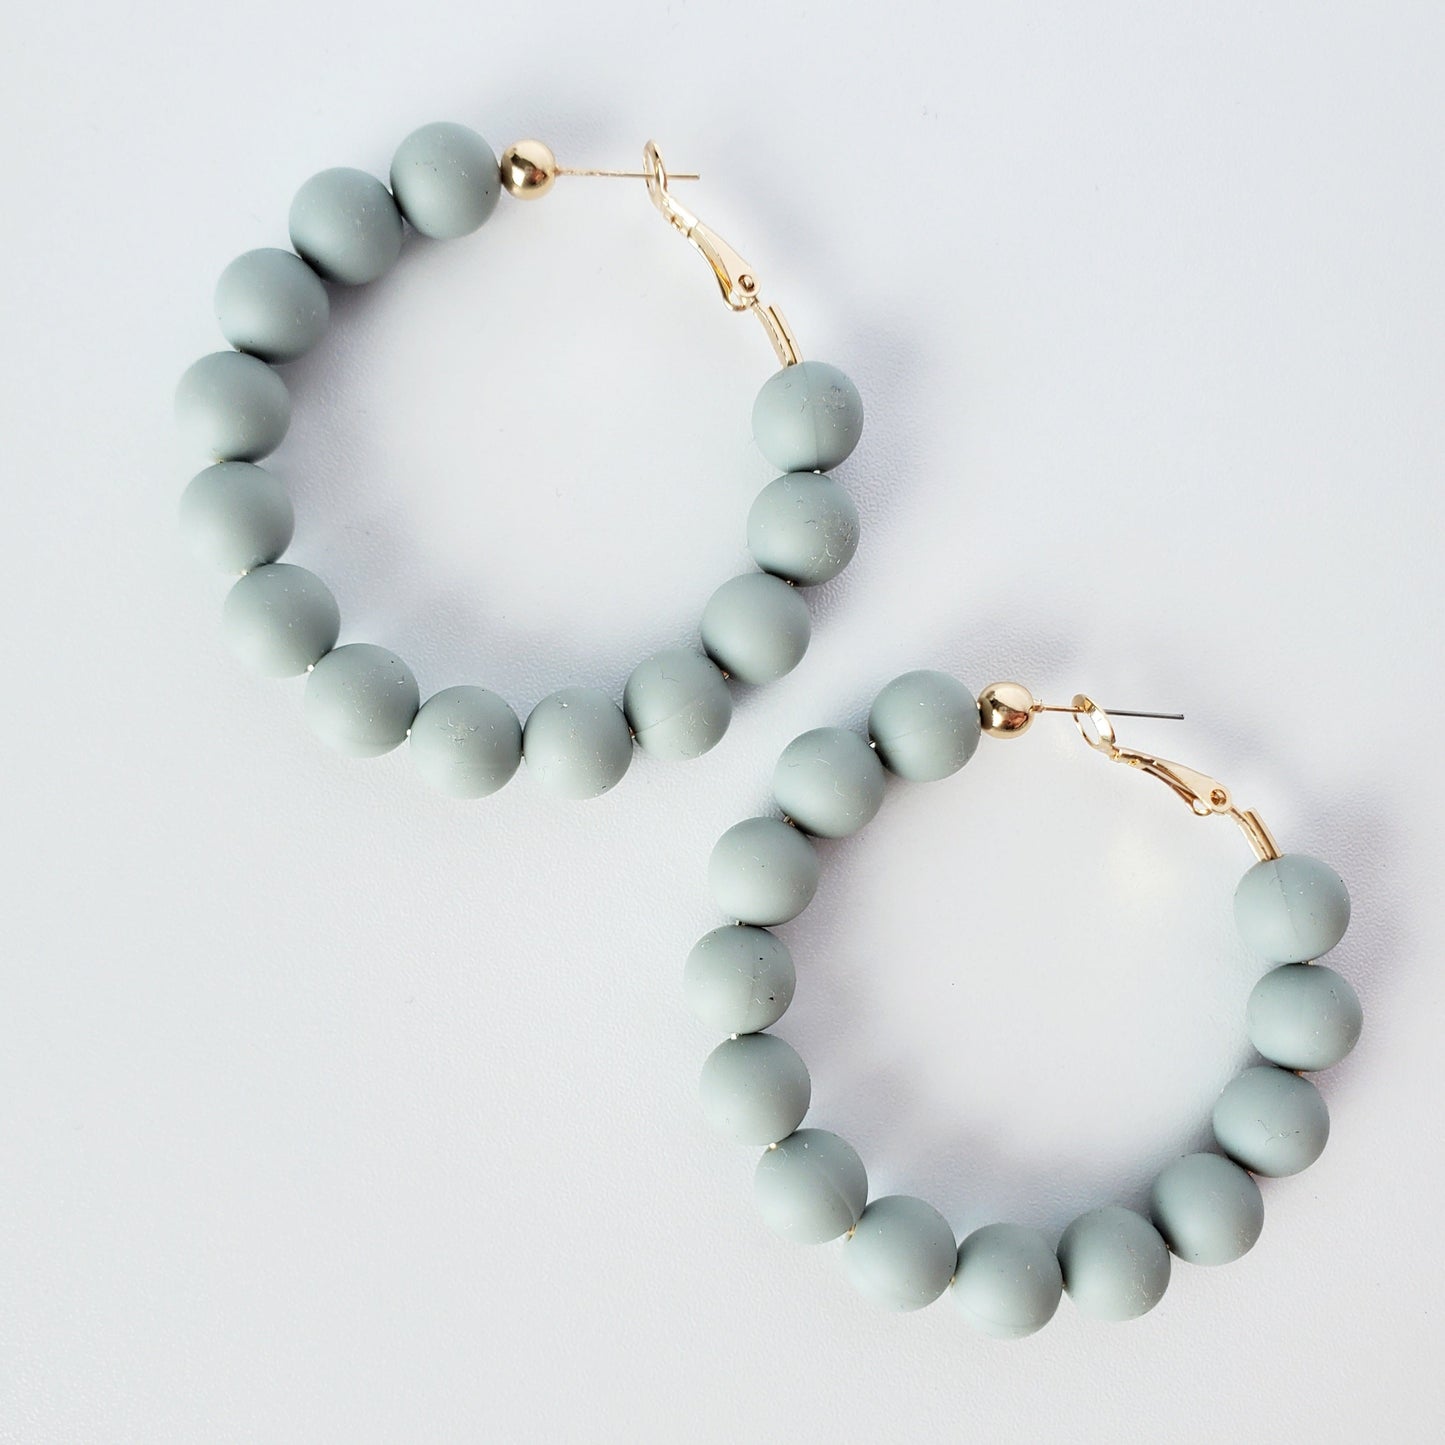 Sage colored rubber beads on a 2.25 inch gold hoop earring, sitting on a white table. the earrings are hinge back